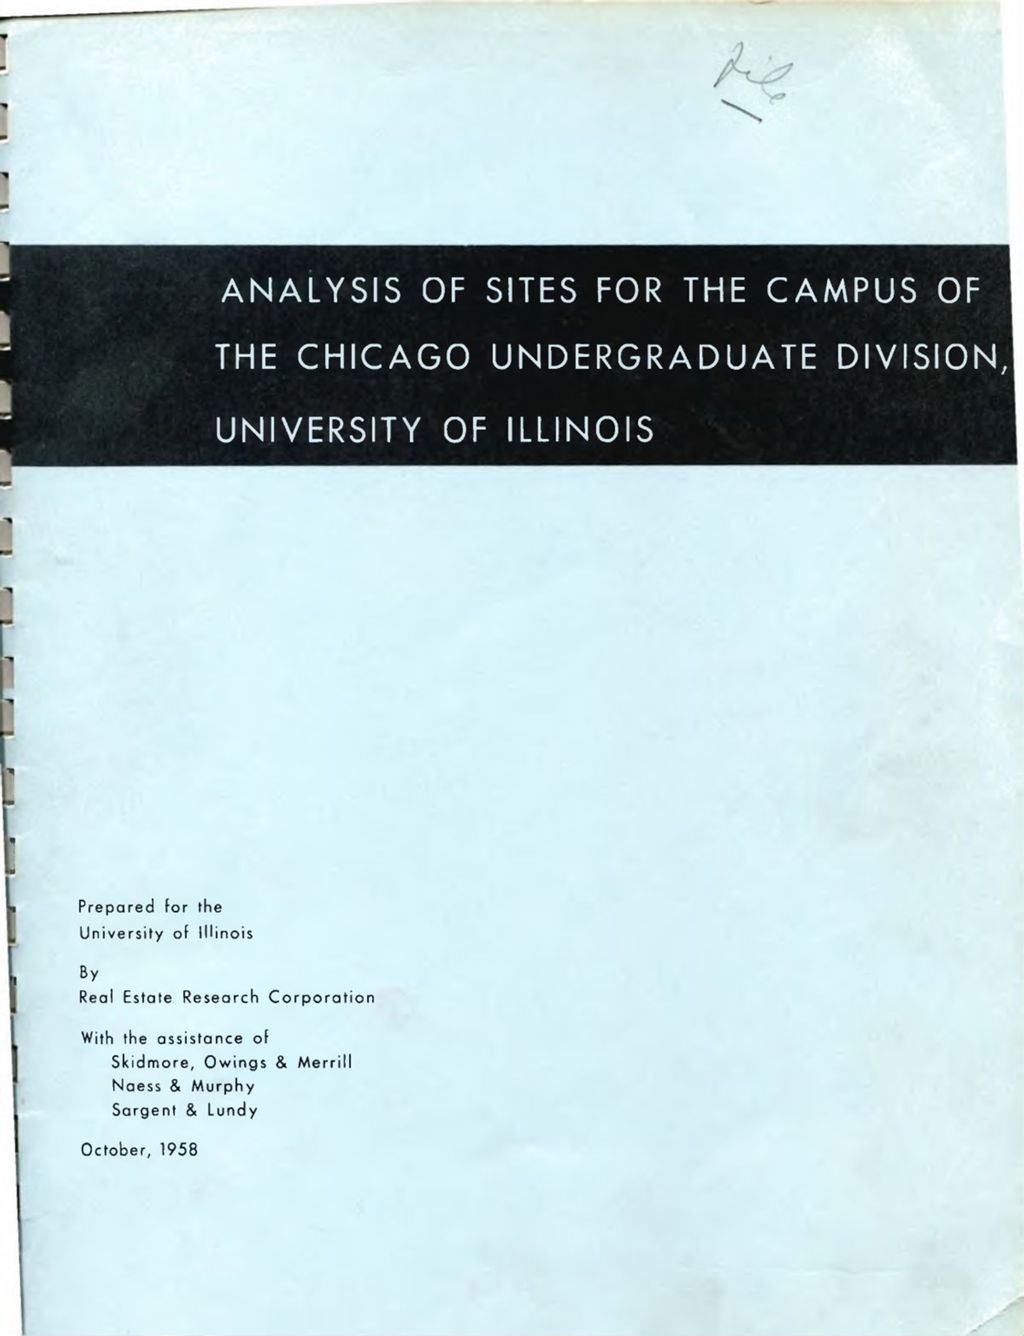 Miniature of Analysis of Sites for the Campus of the Chicago Undergraduate Division, 1958